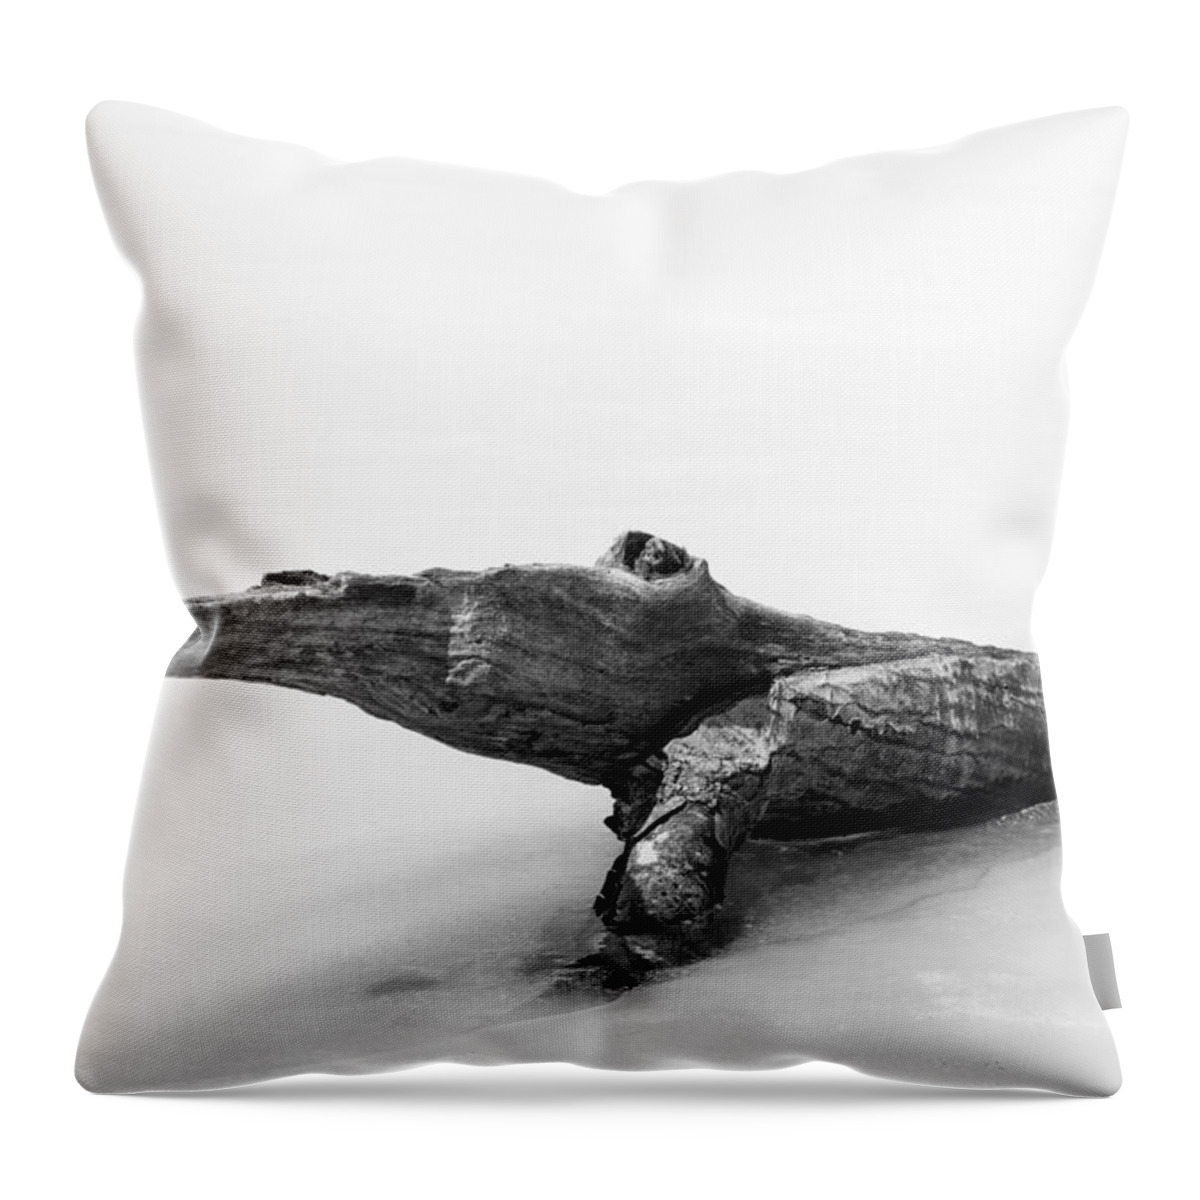 Black And White Throw Pillow featuring the photograph Log Monster by Michael Hubley